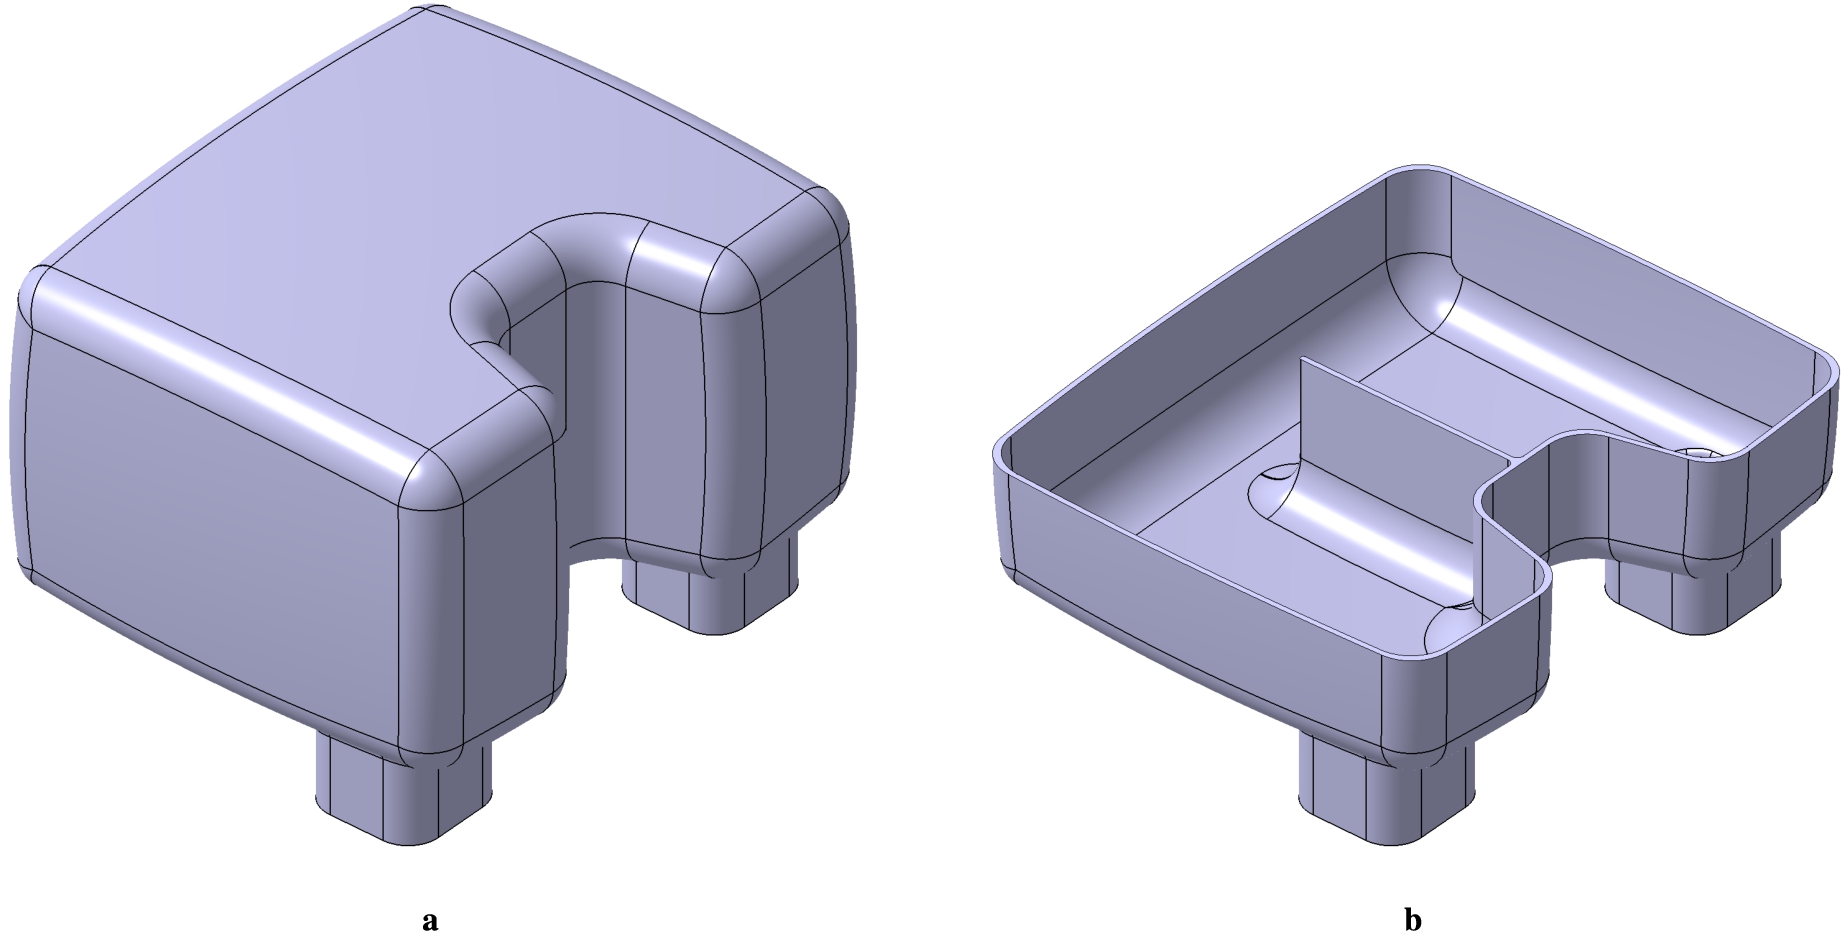 Design of LD2 moderator with rounded shape, developed by the engineering team. (A) full model. (B) horizontal cut.